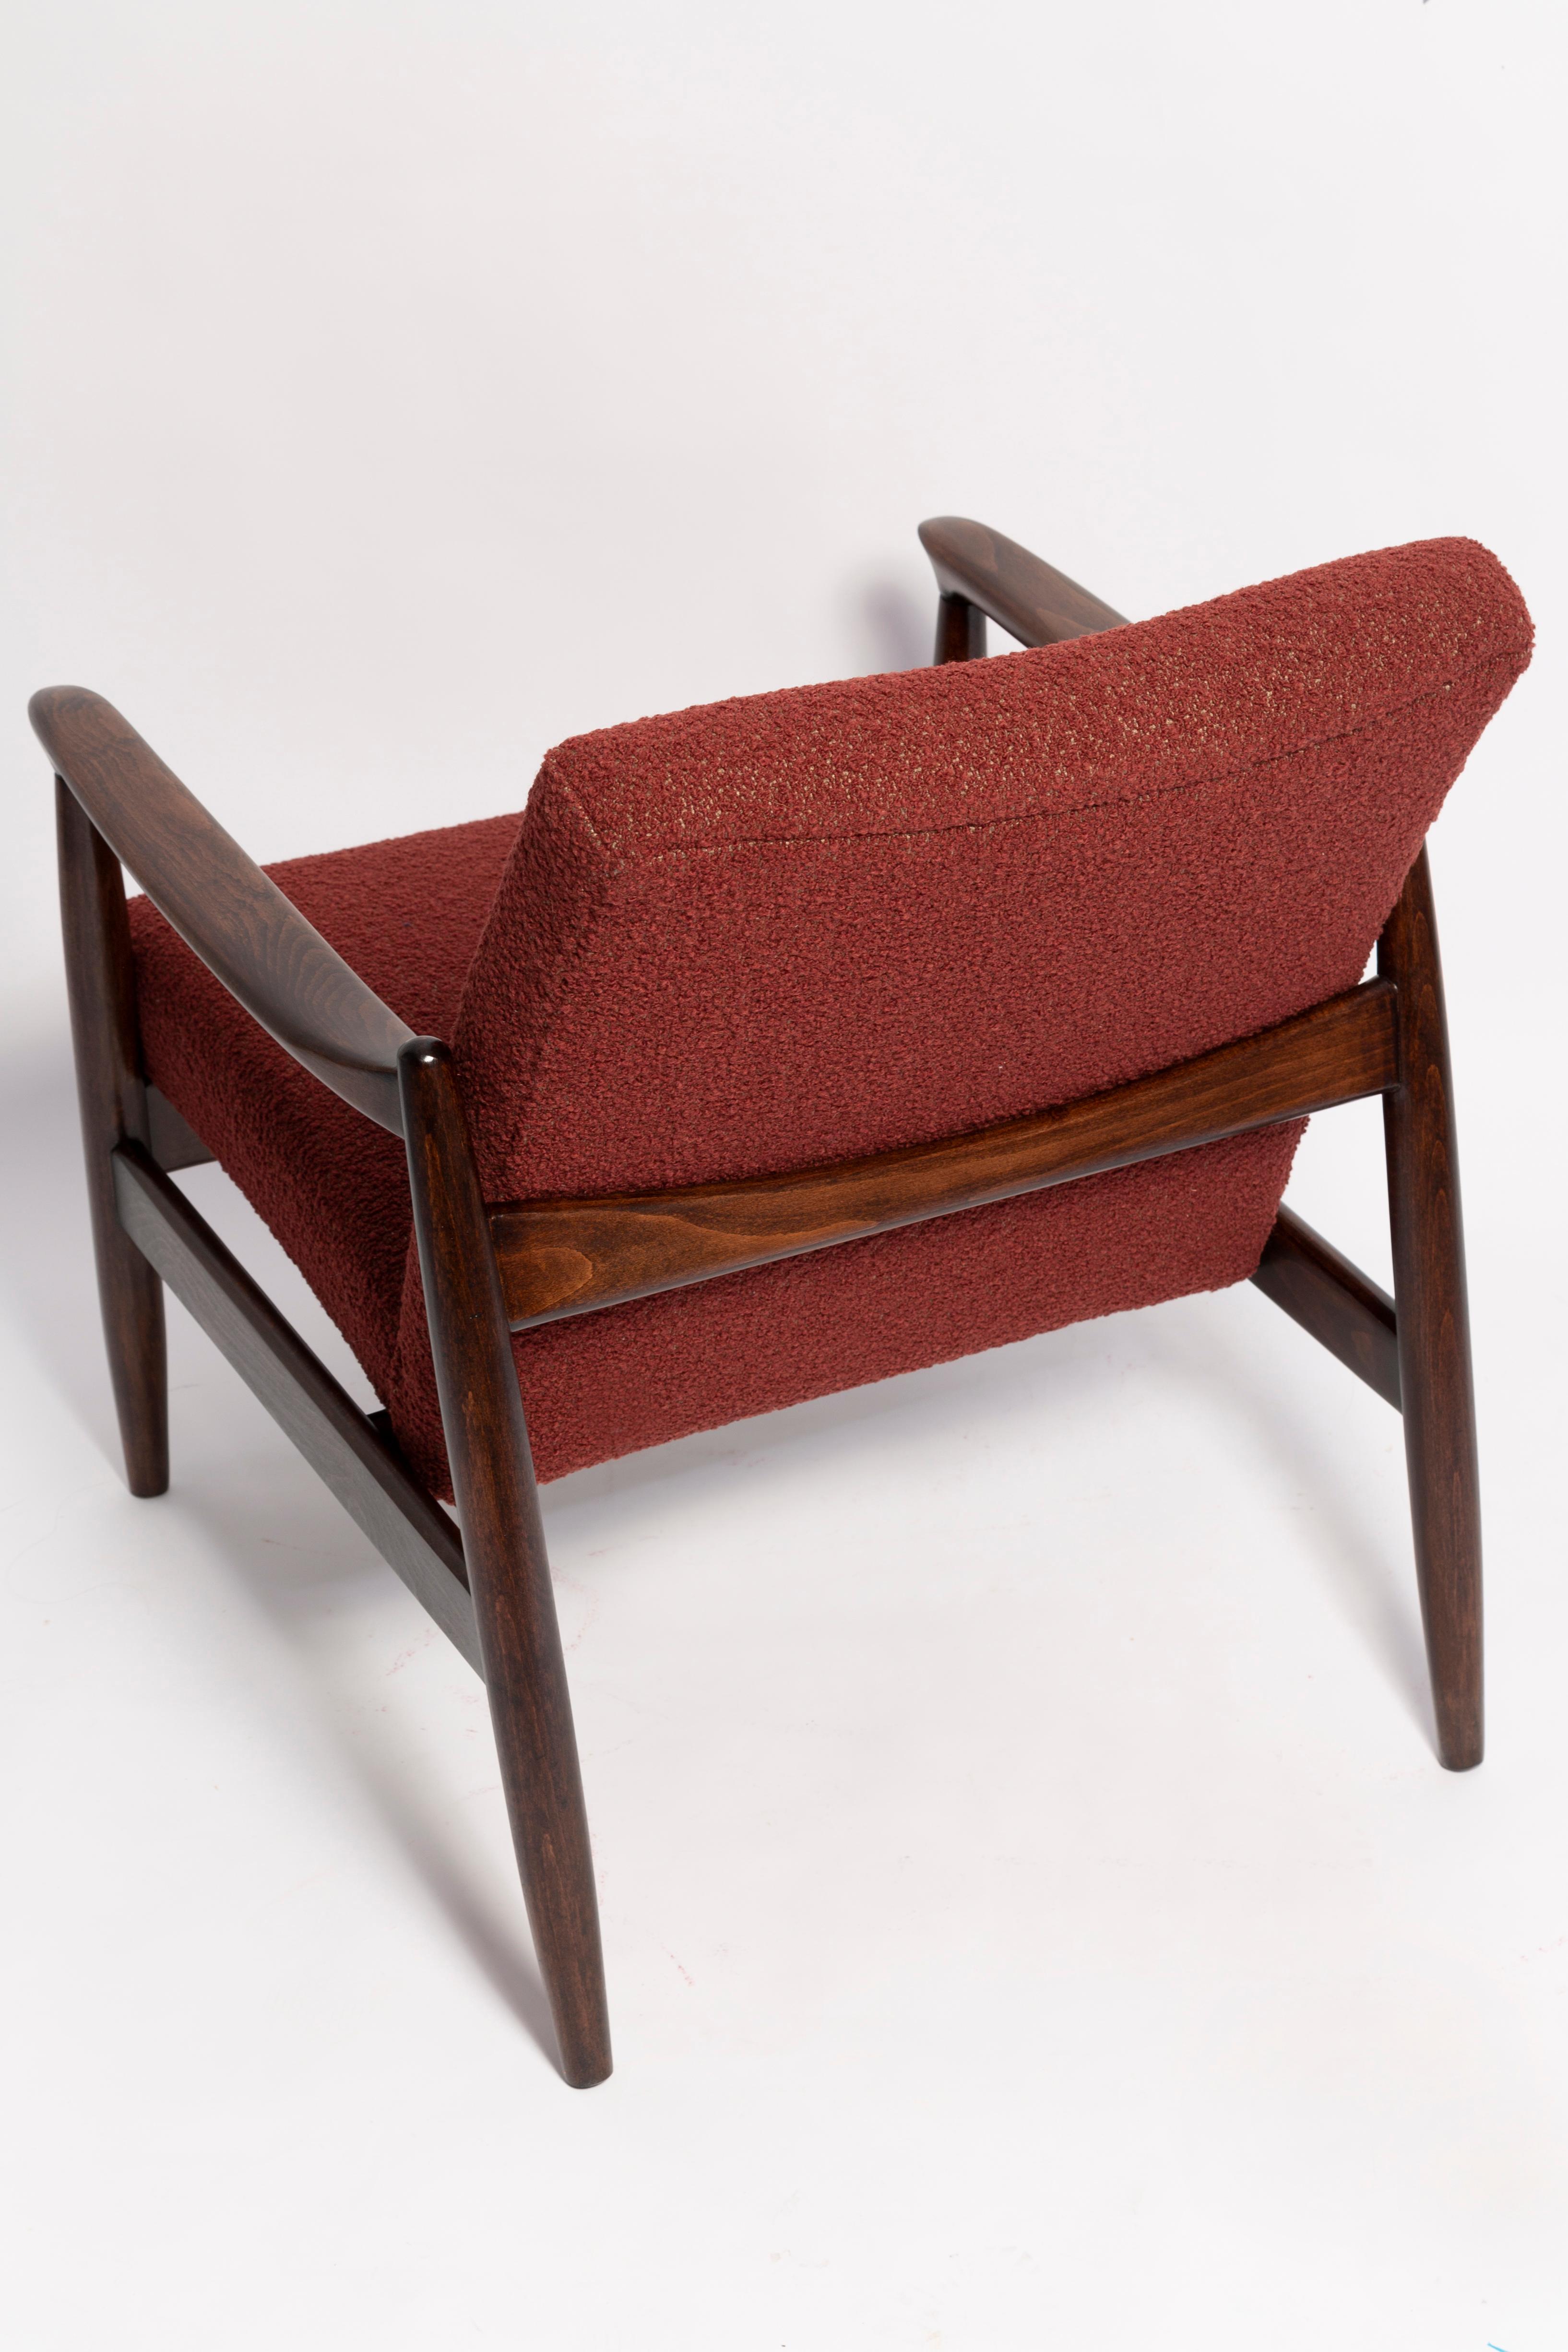 Two Mid Century Burgundy Boucle GFM-64 Armchairs, Edmund Homa, Europe, 1960s For Sale 3